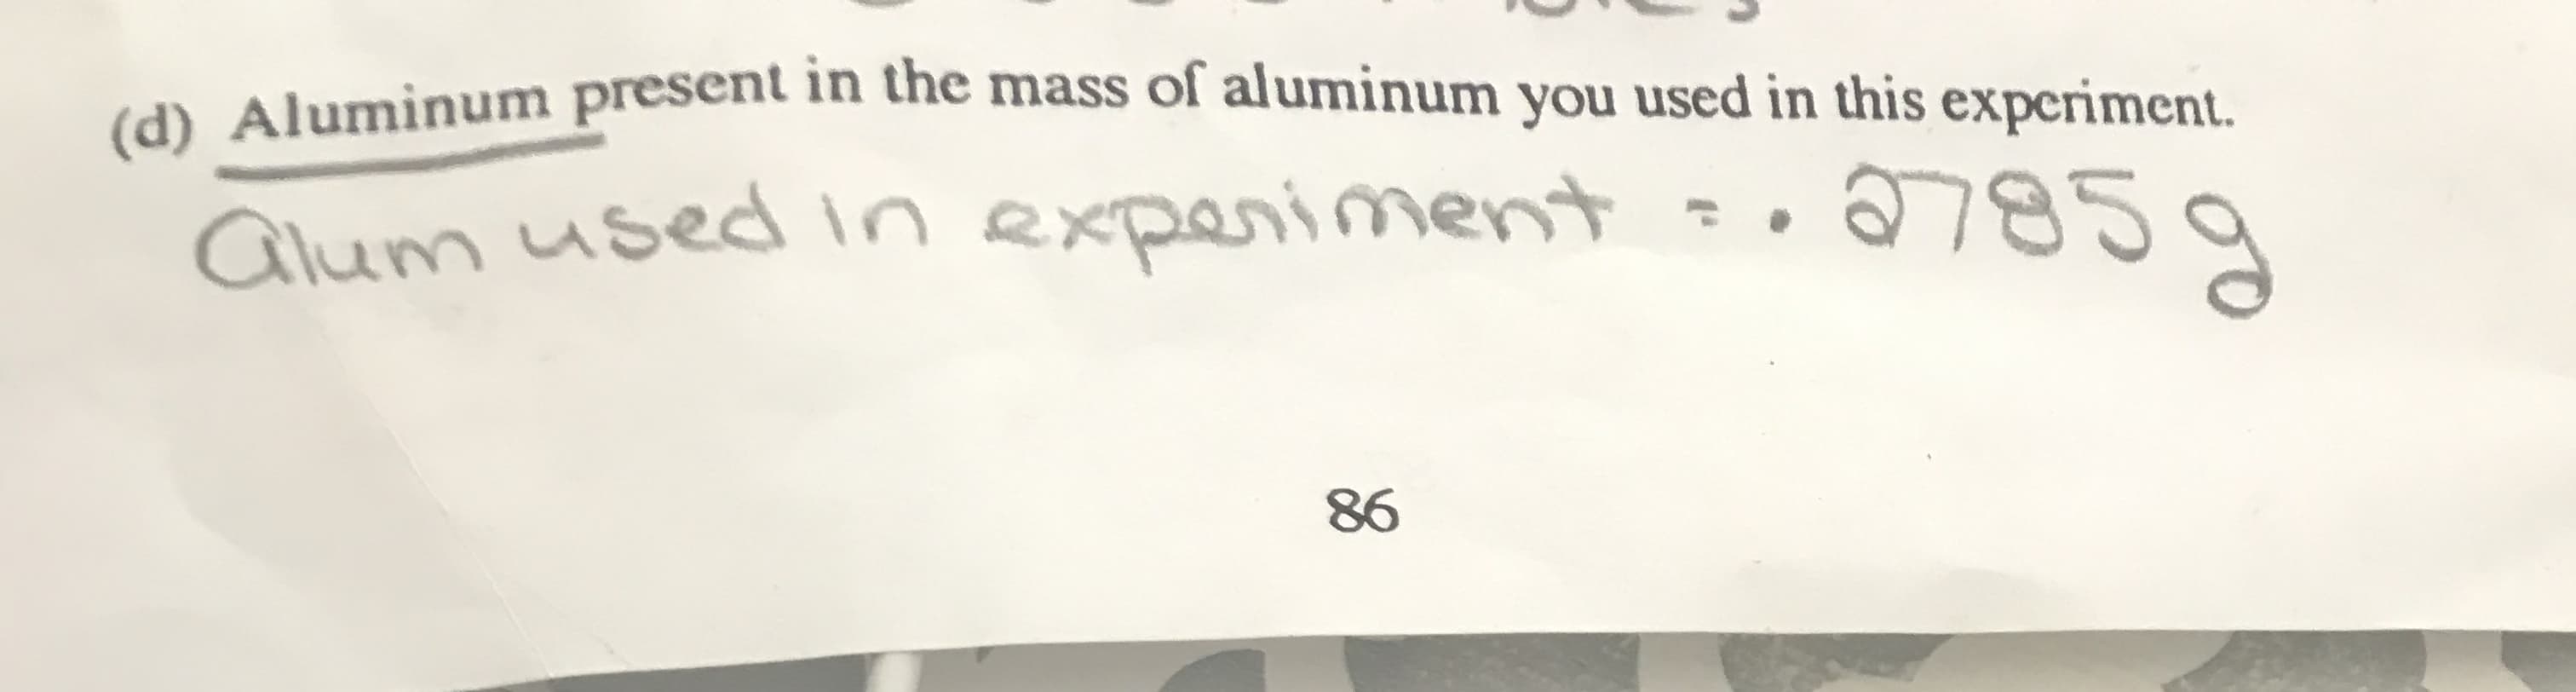 (d) Aluminum present in the mass of aluminum you used in this experiment.
a7859
alum usedinexperiment
86
